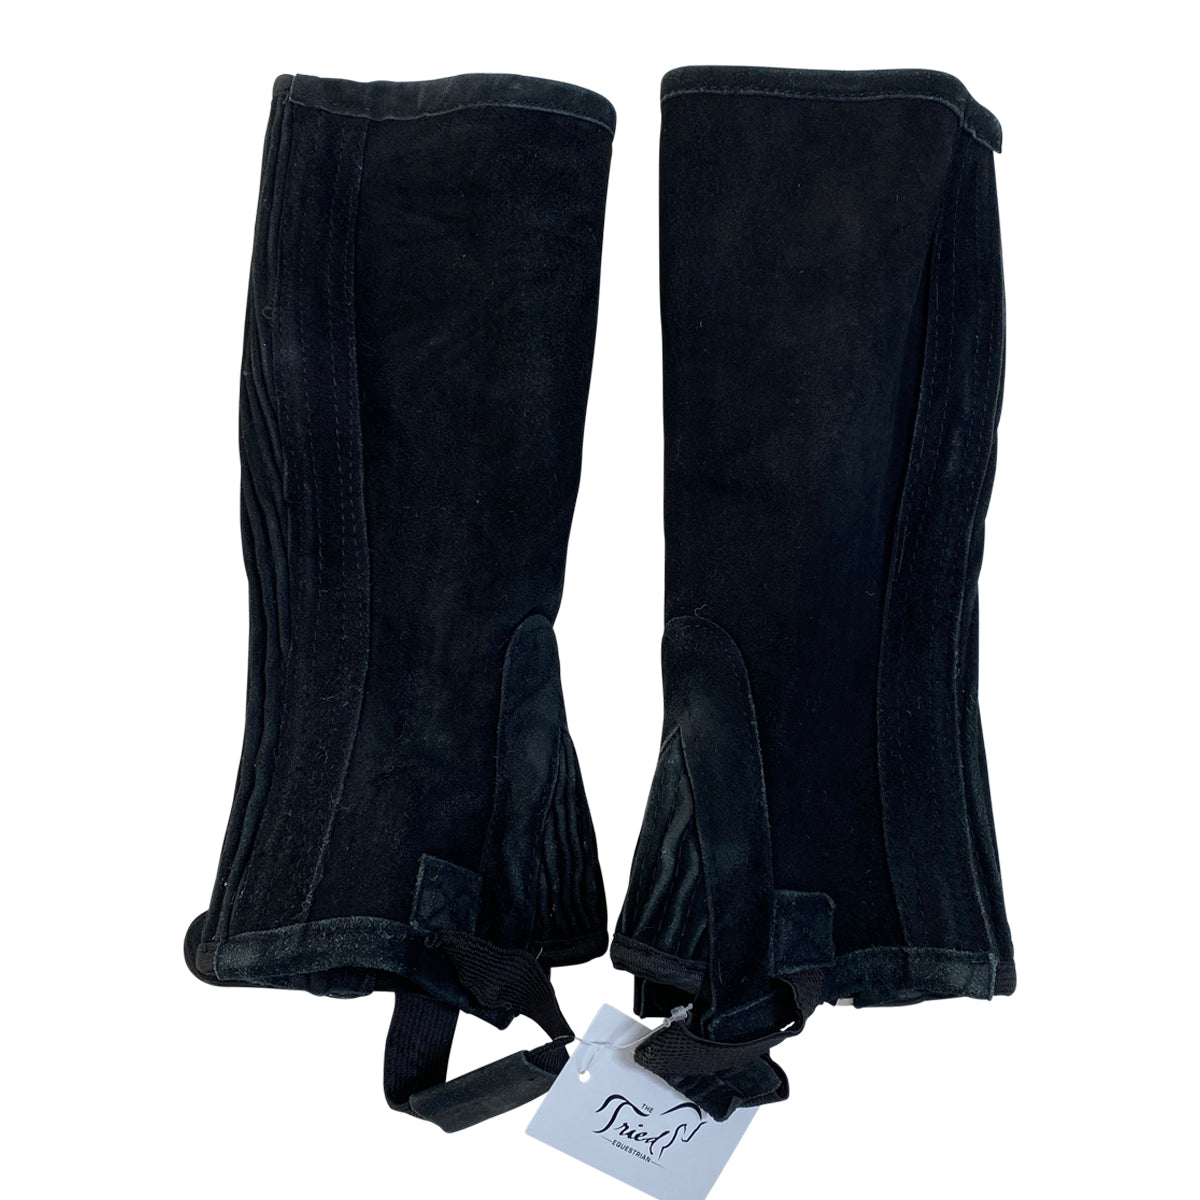 Royal Highness Suede Leather Half Chaps in Black